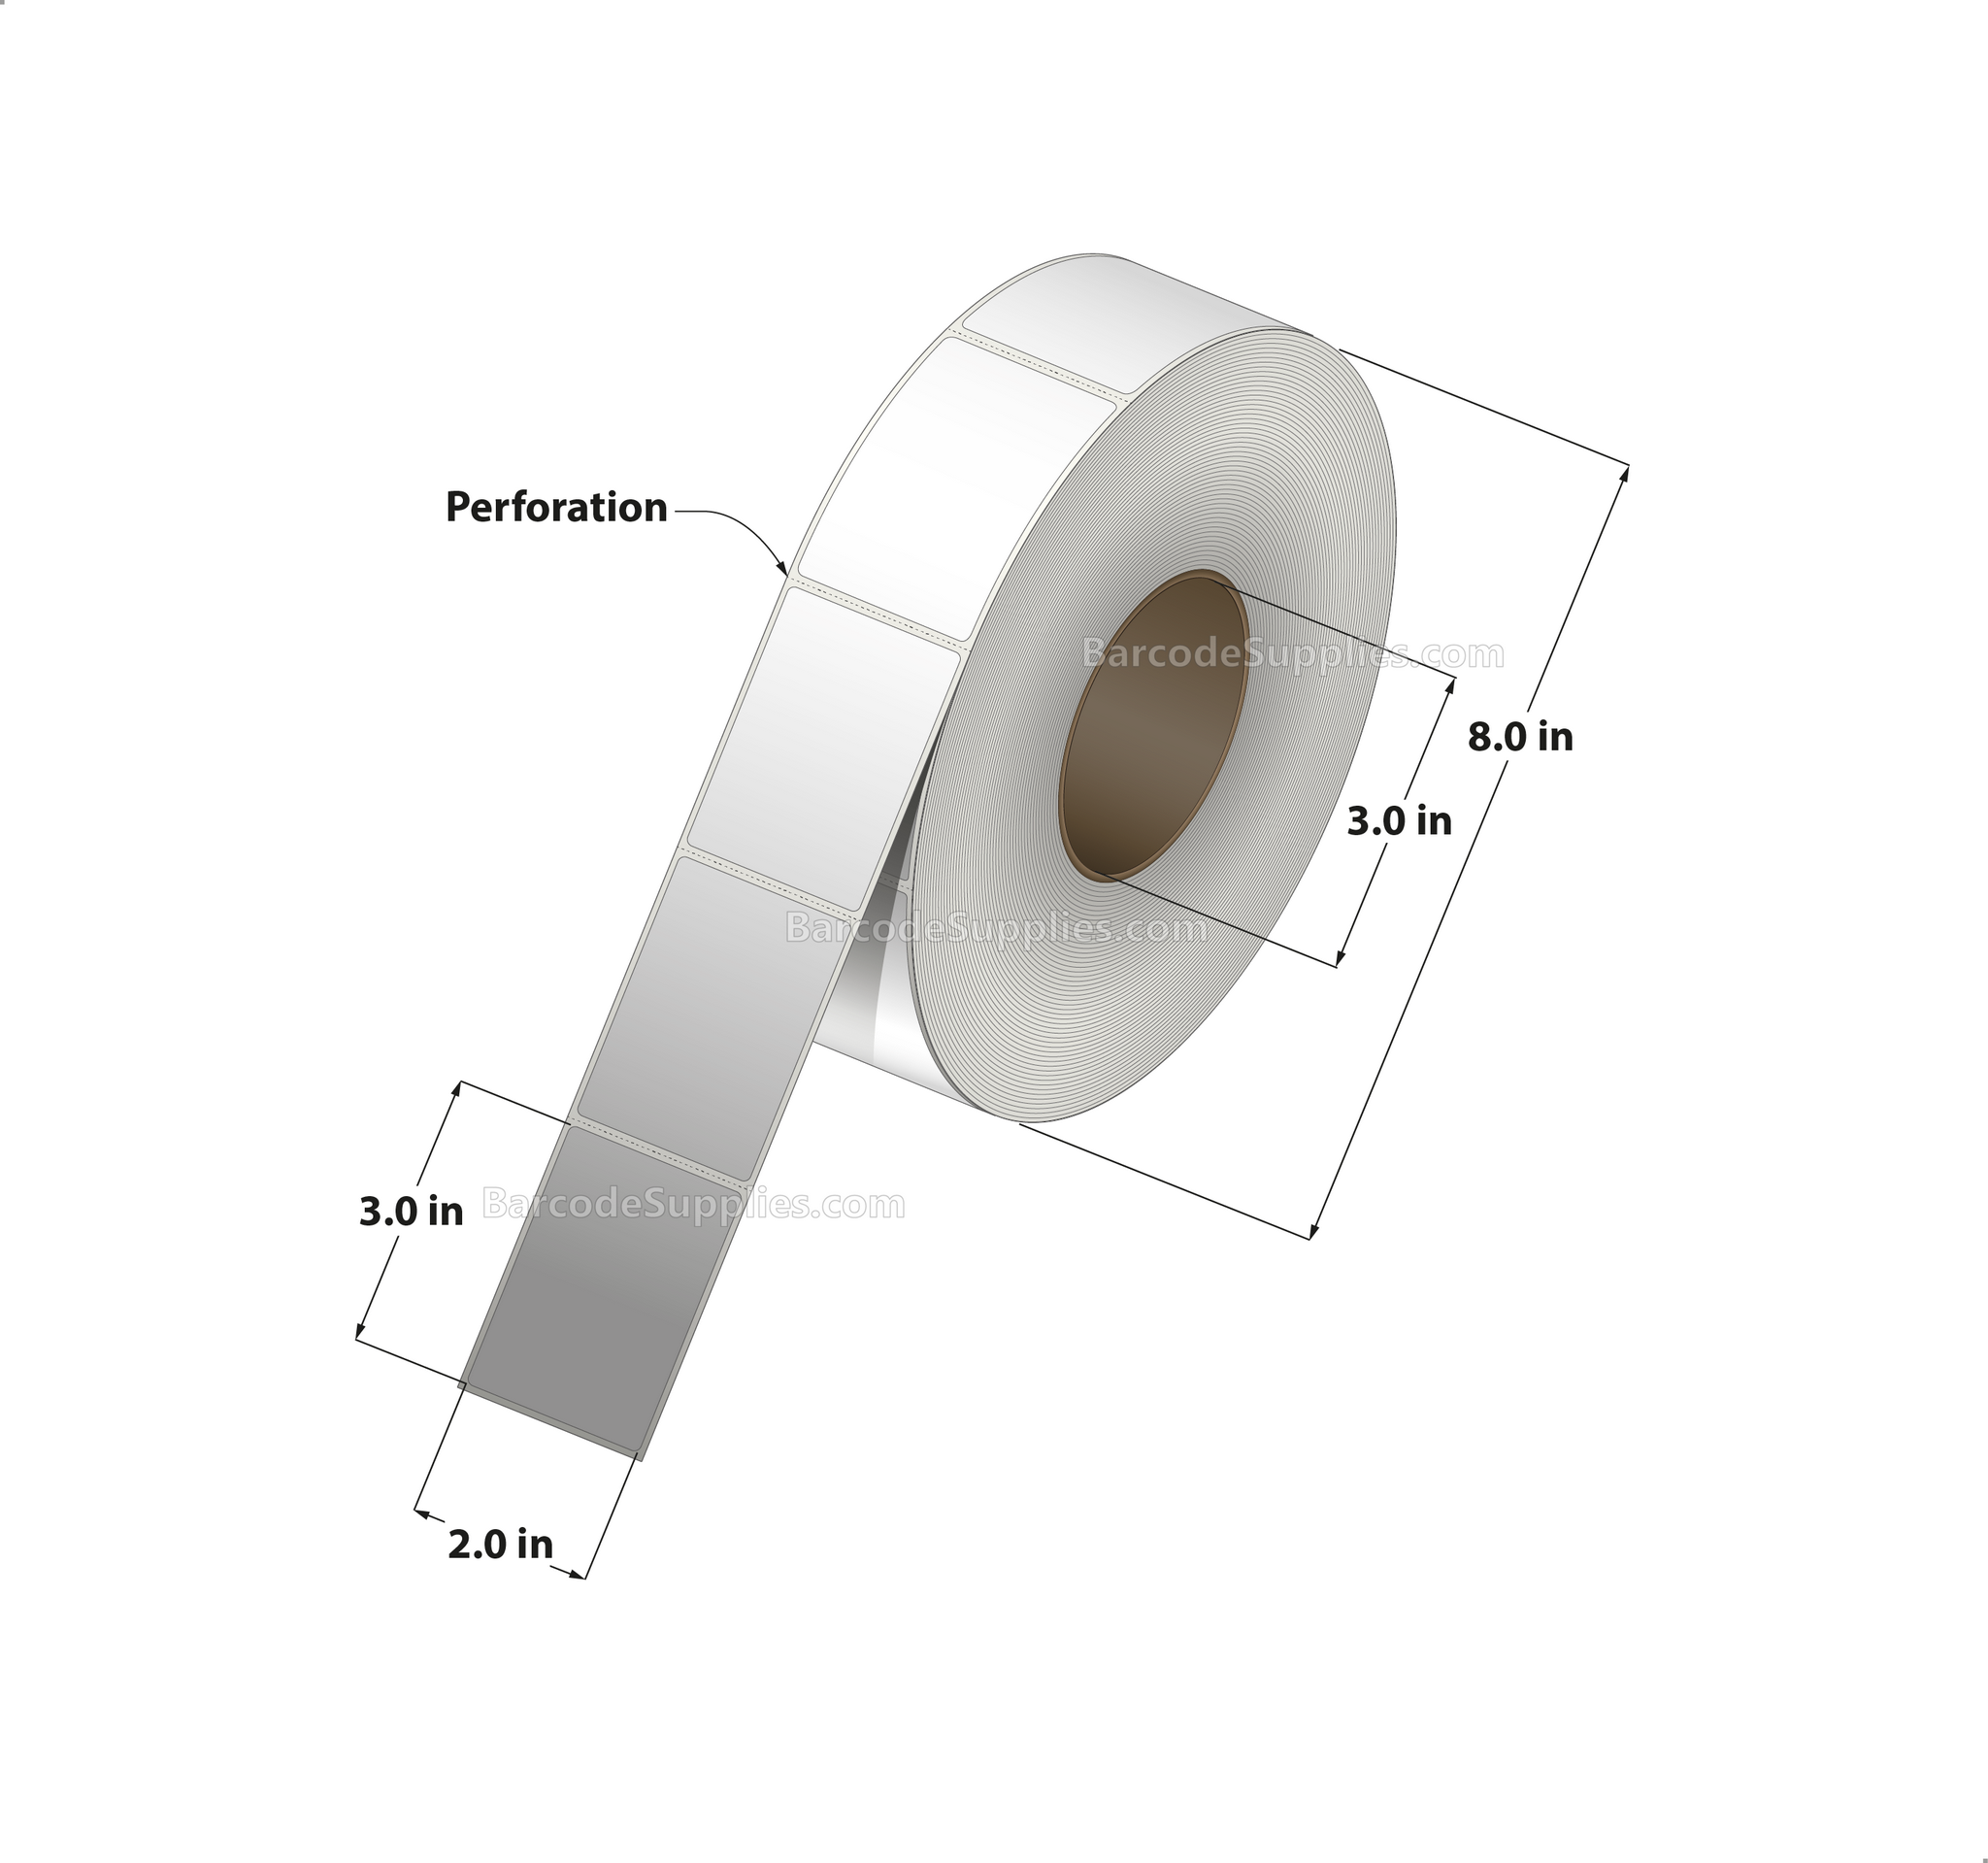 2 x 3 Thermal Transfer White Labels With Permanent Adhesive - Perforated - 1900 Labels Per Roll - Carton Of 8 Rolls - 15200 Labels Total - MPN: RT-2-3-1900-3